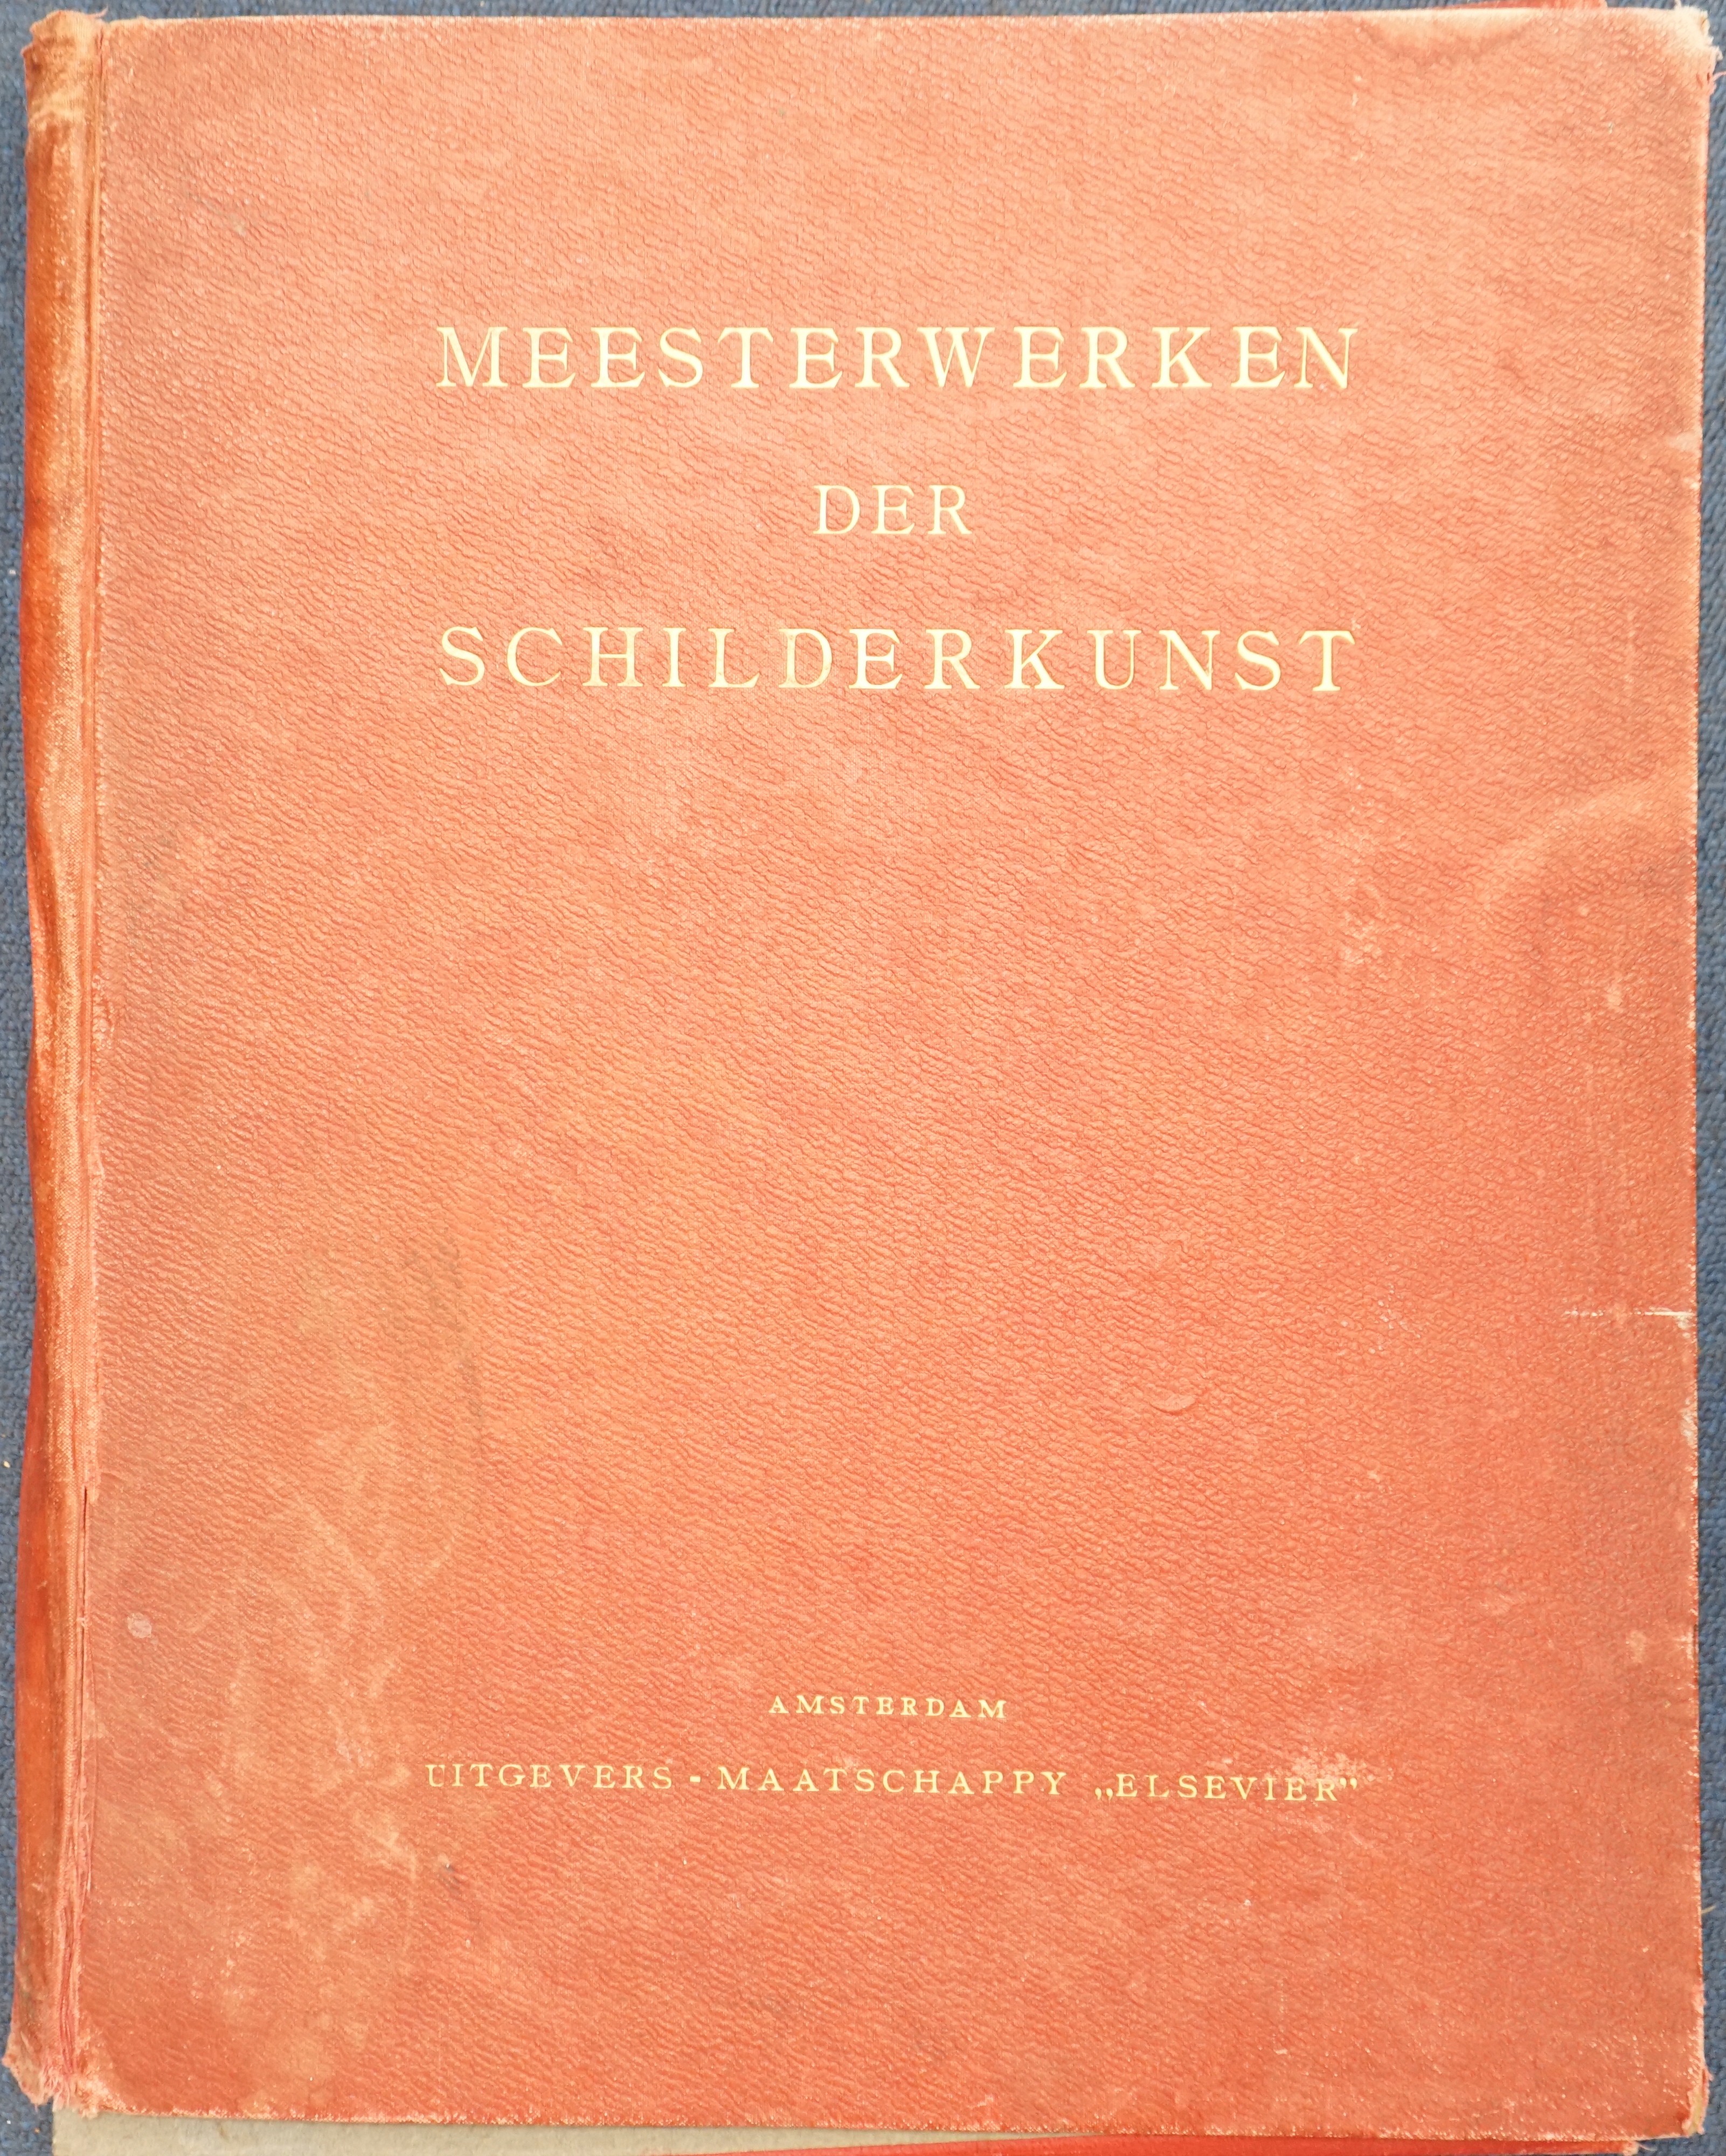 Conway, Sir Martin and Hofstede de Groot, Dr. C. Meesterwerken der Schilderkunst....63 (ex.72) loose photogravure plates with descriptive sheet to each, in 24 printed wrappers contained in a gilt-lettered cloth portfolio